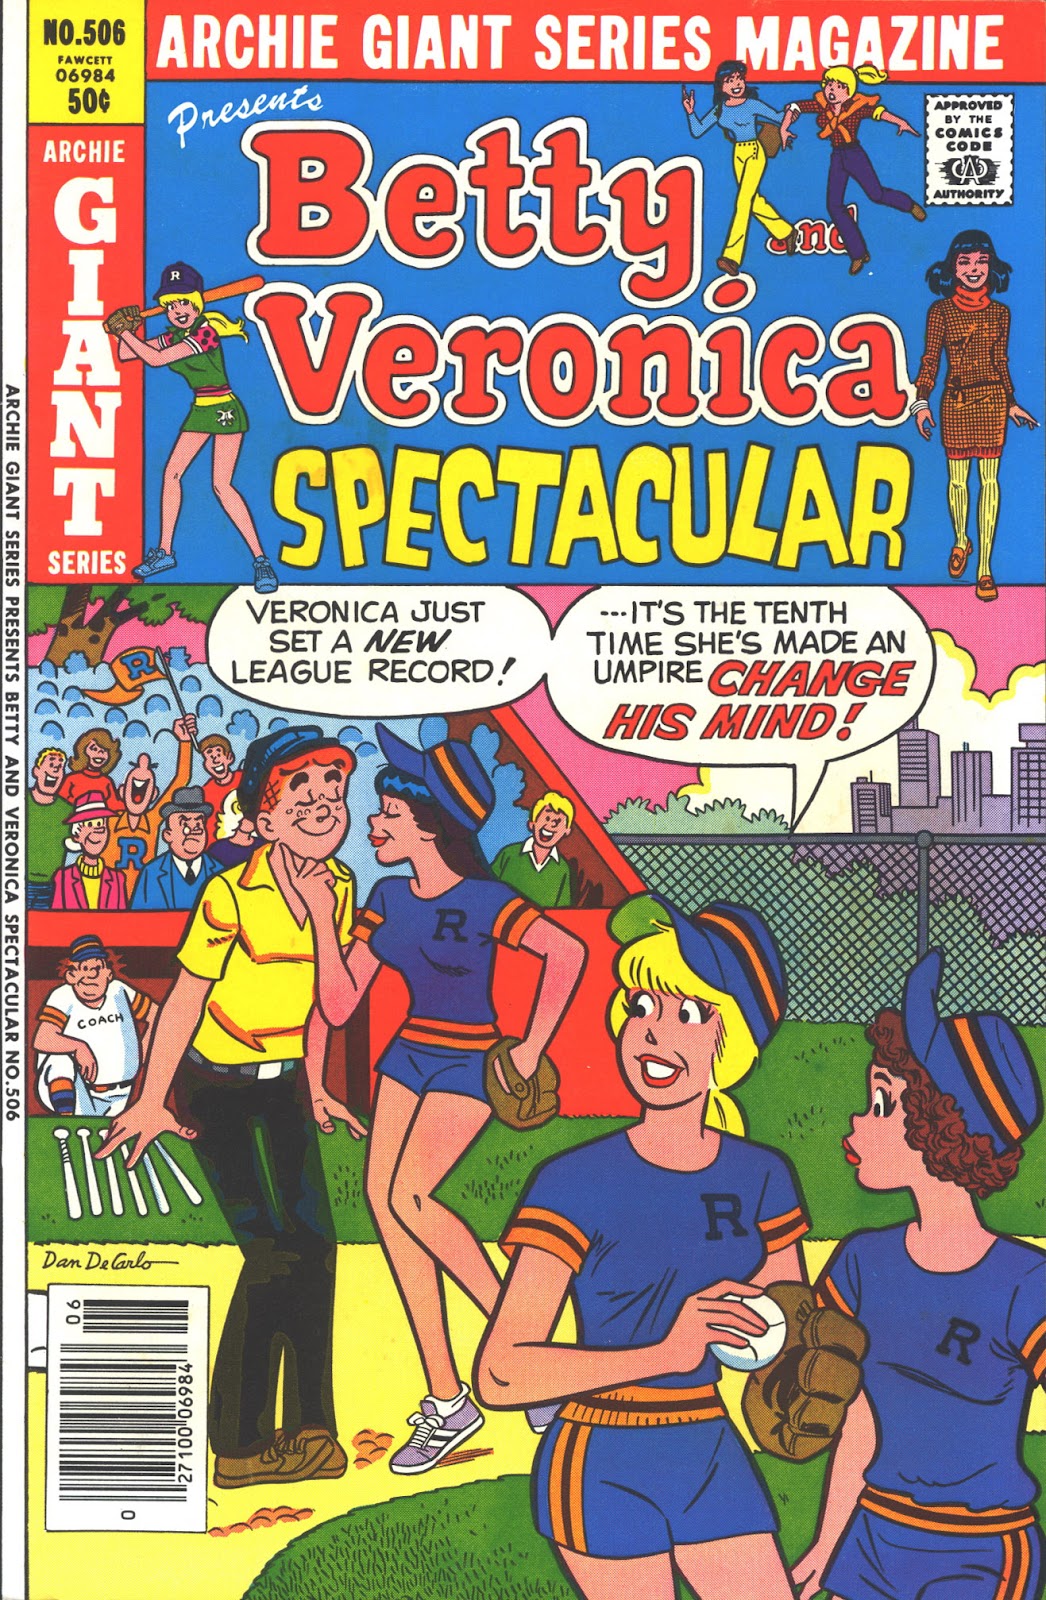 Archie Giant Series Magazine issue 506 - Page 1